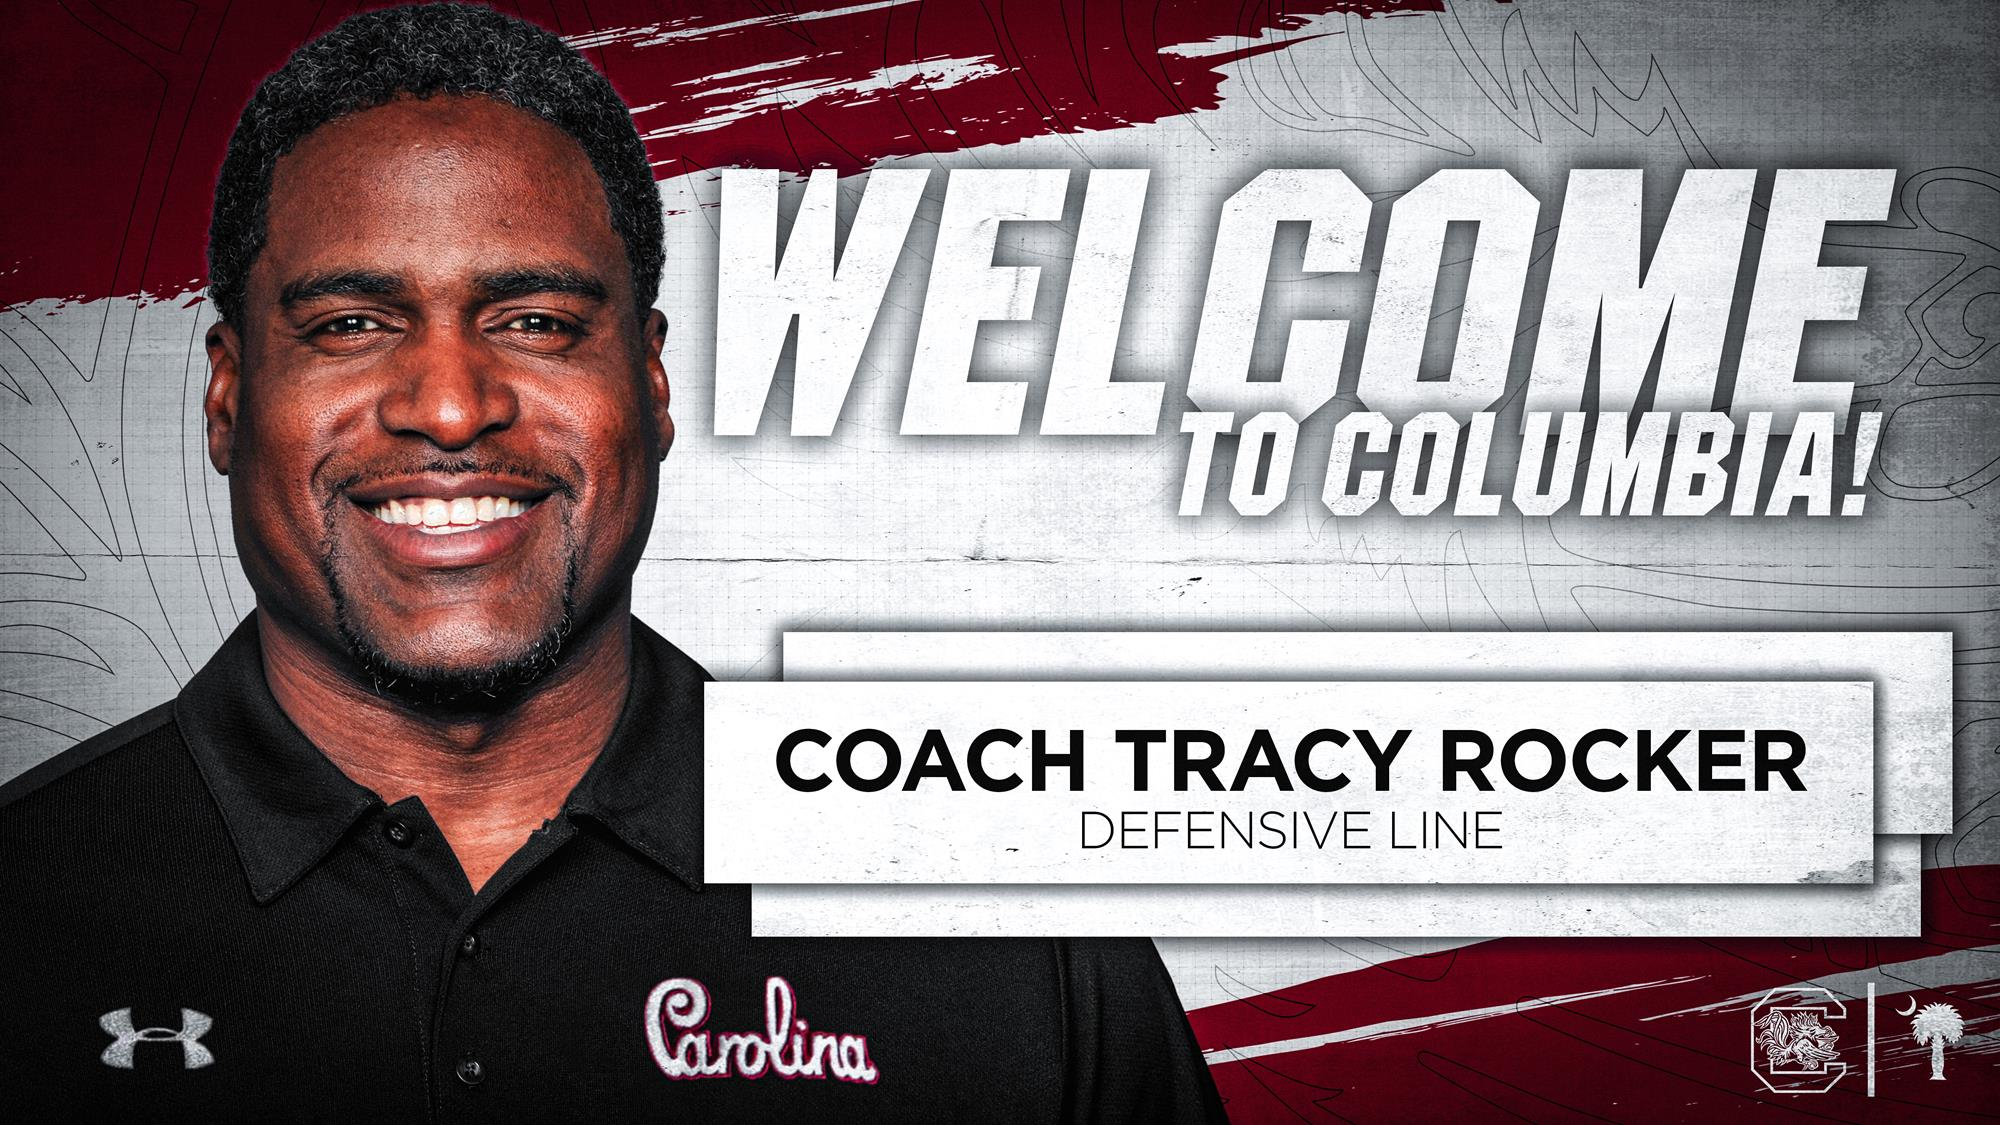 Tracy Rocker Named Defensive Line Coach